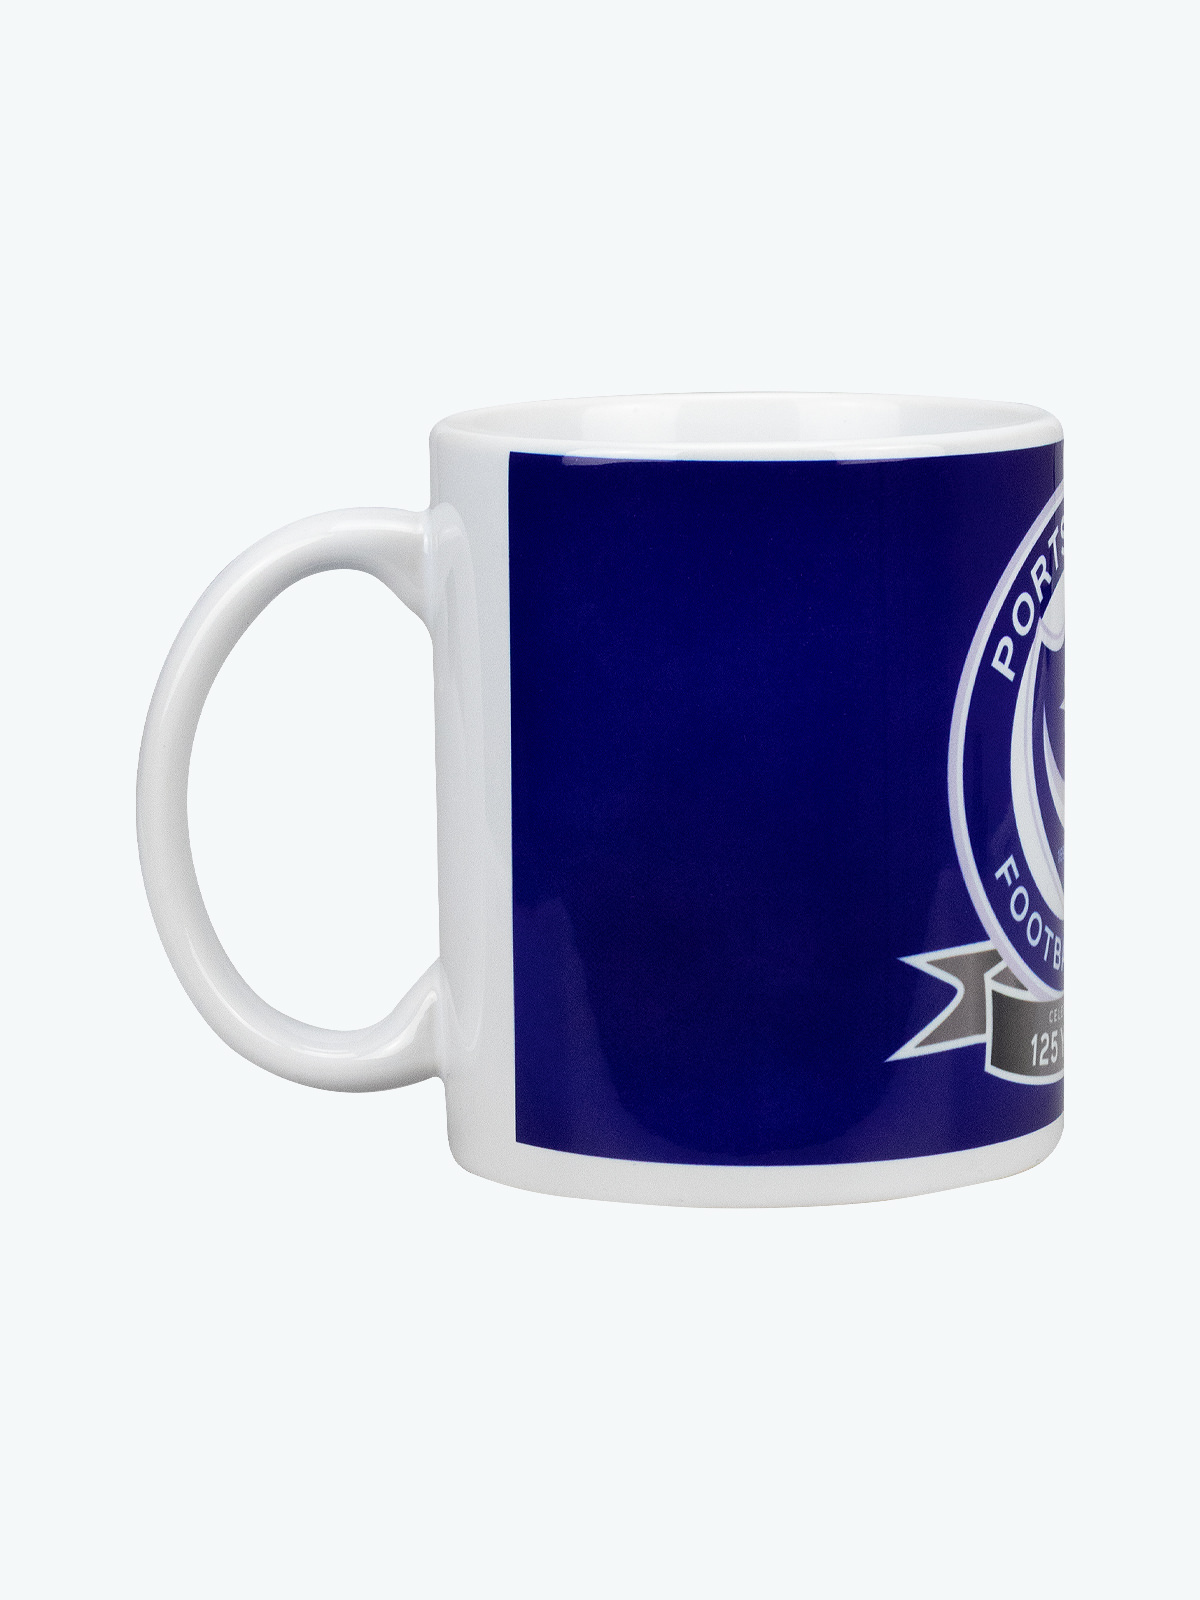 picture of 125th mug